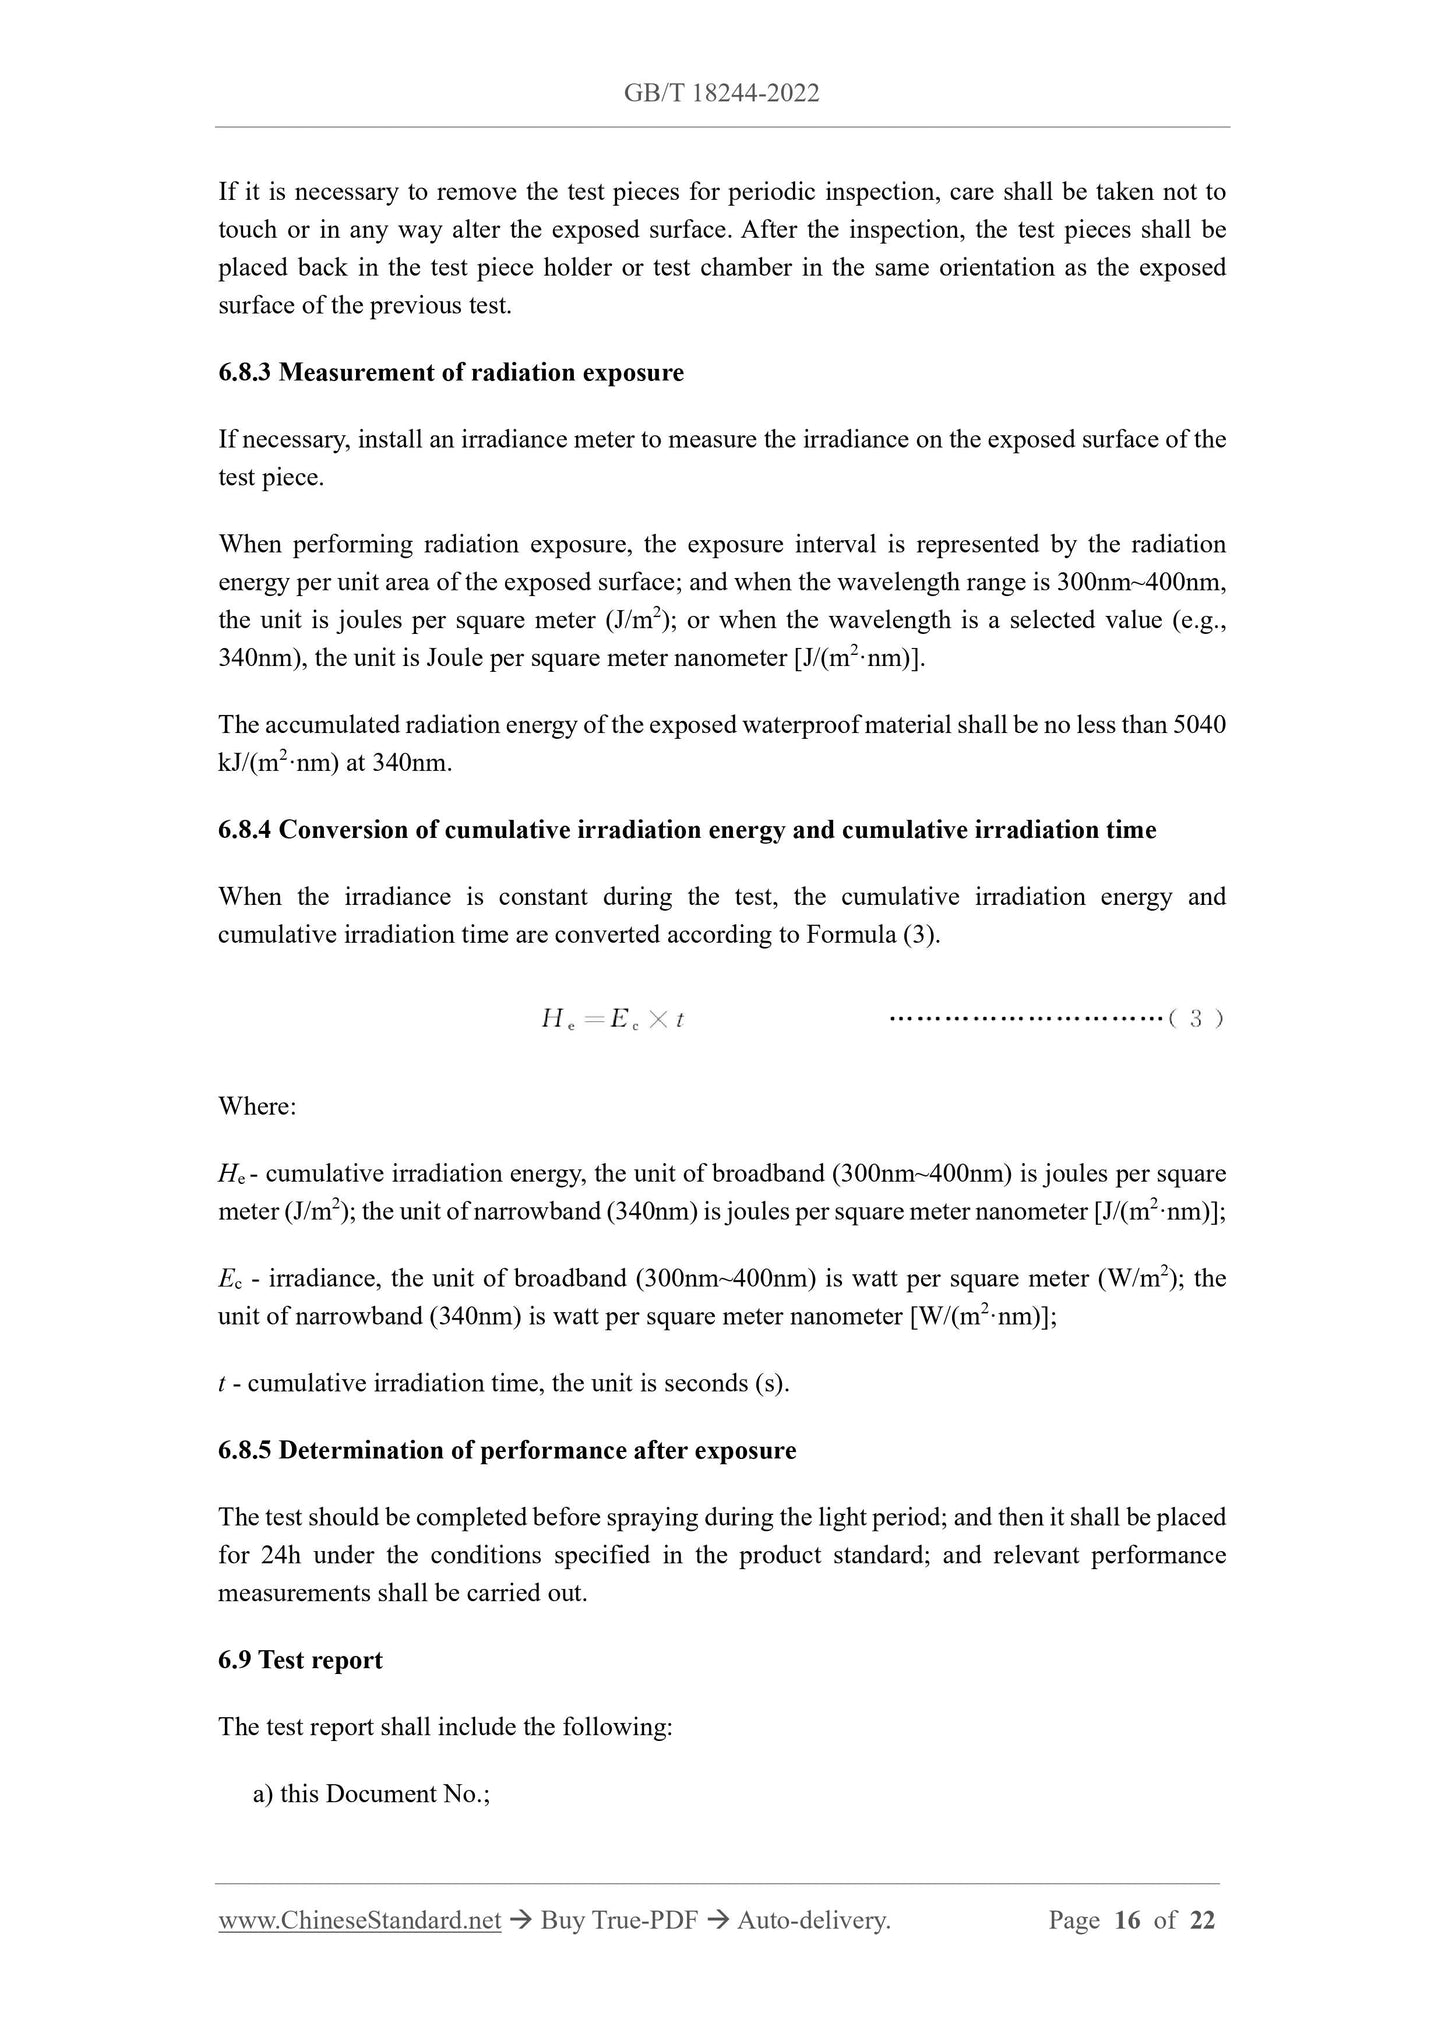 GB/T 18244-2022 Page 10